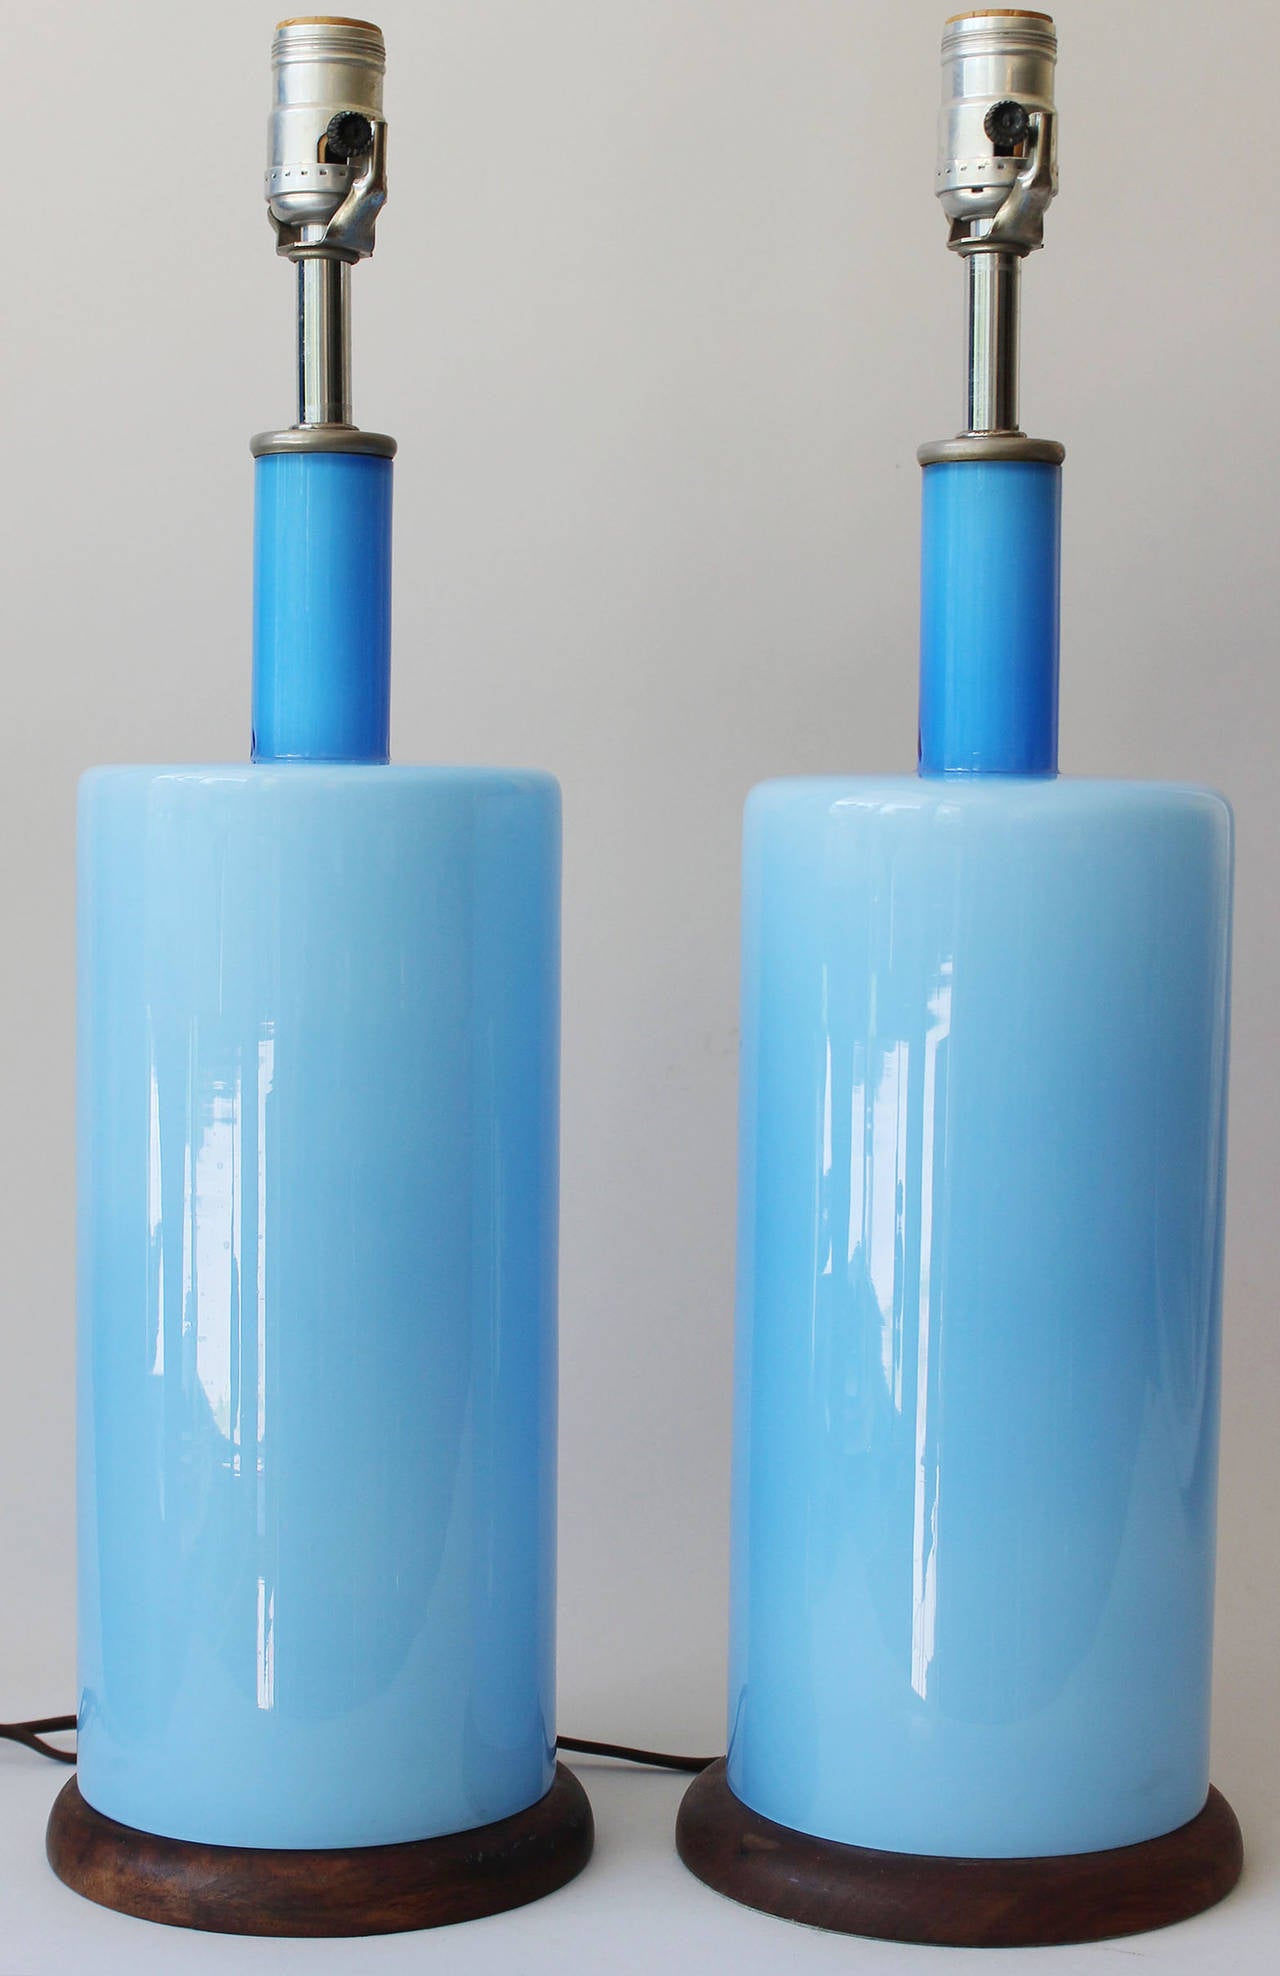 Georgeous Holmegaard style cerulean blue cased glass lamps with teak bases.

Height is to the bottom of the socket.